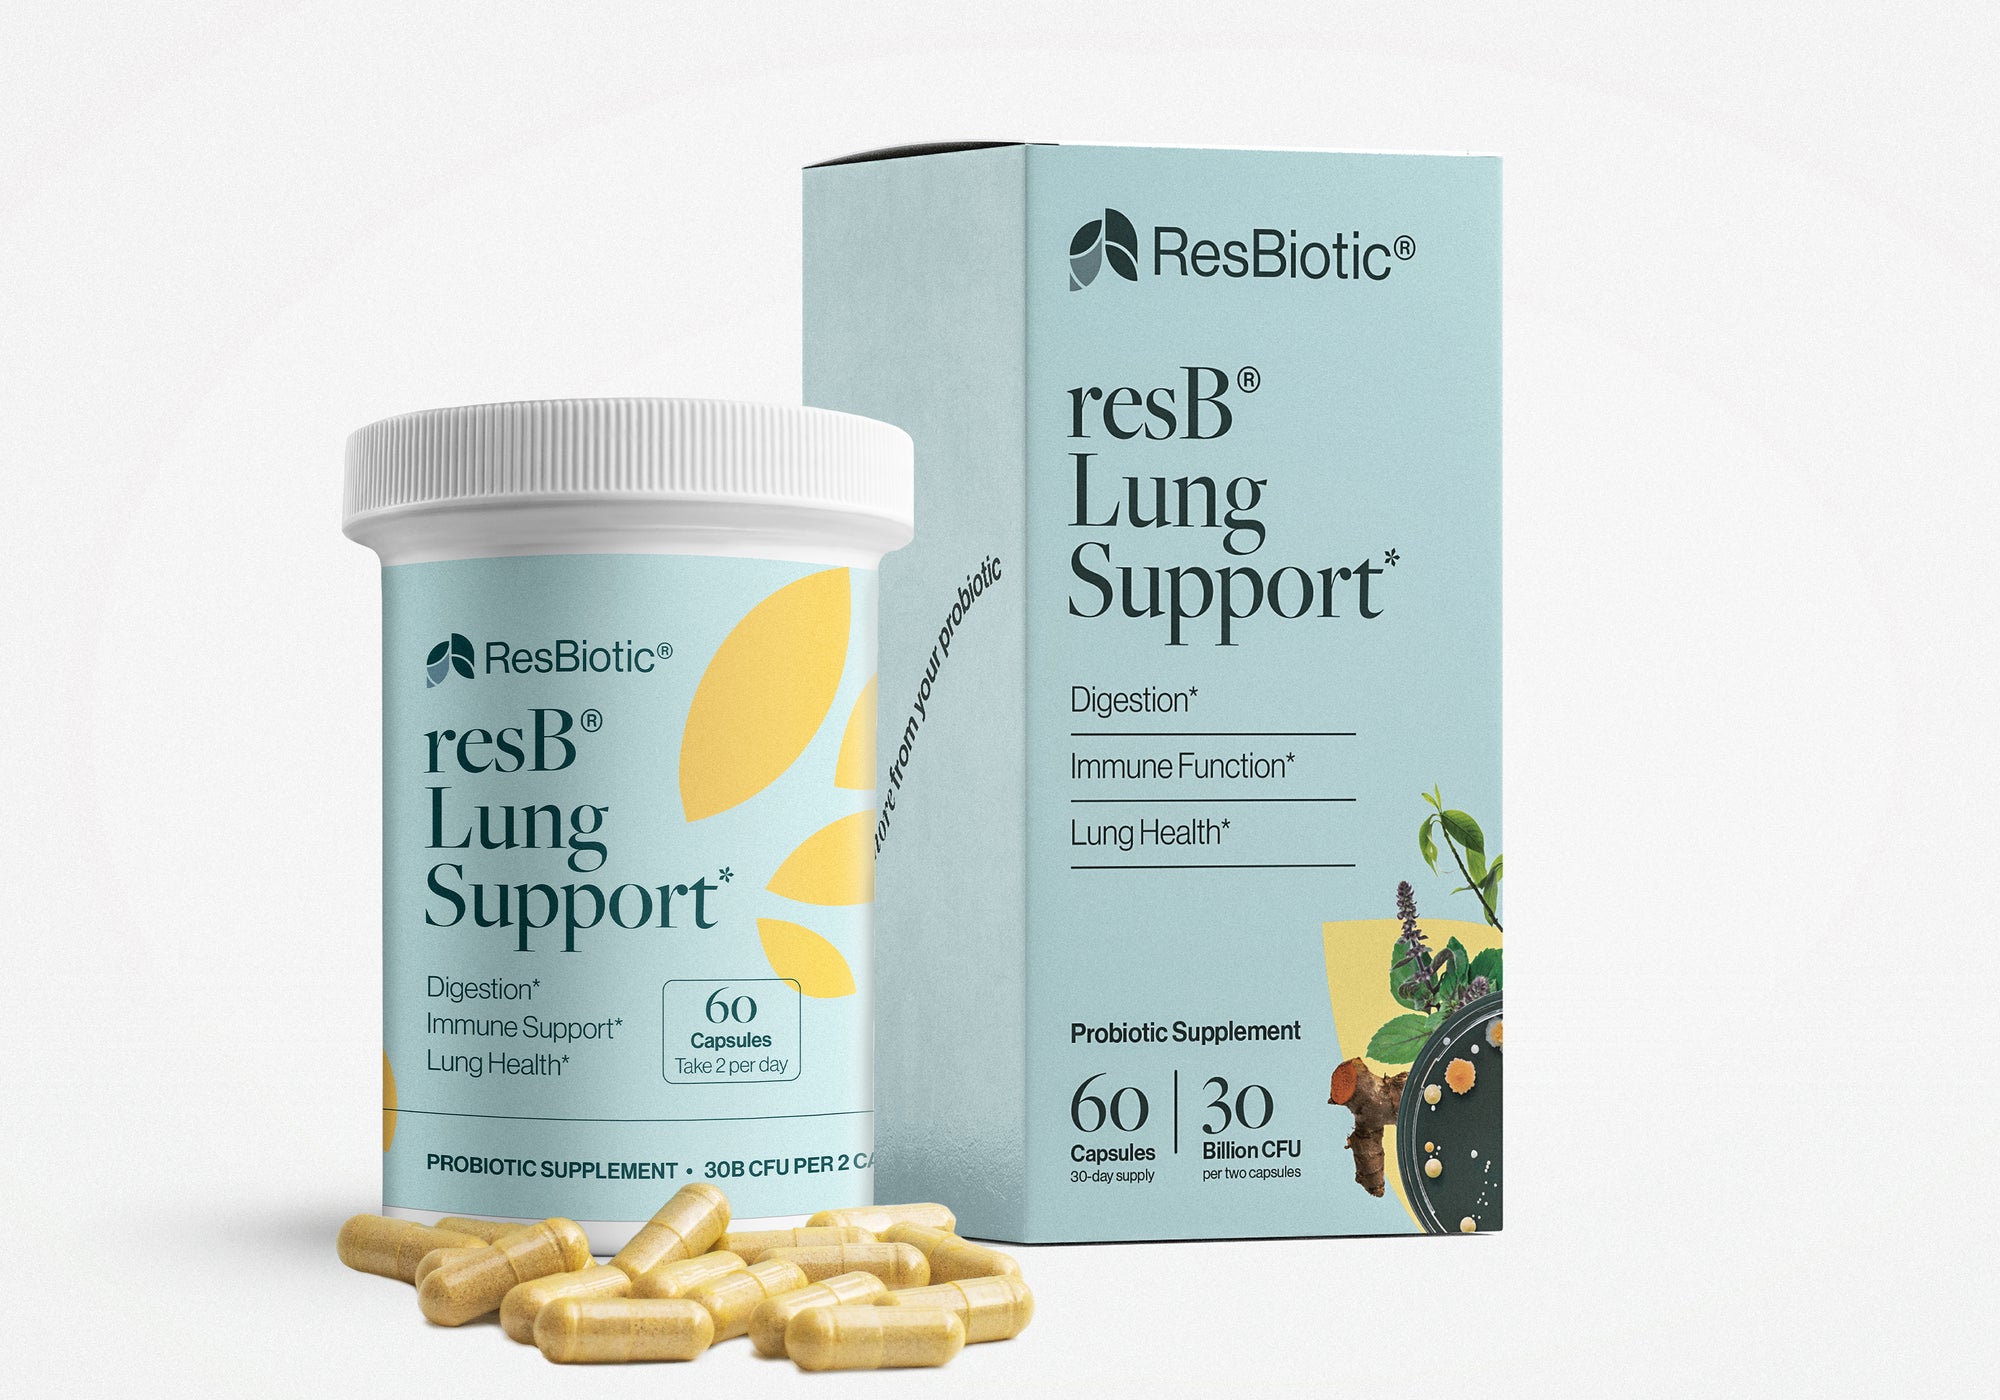 resB Lung Support